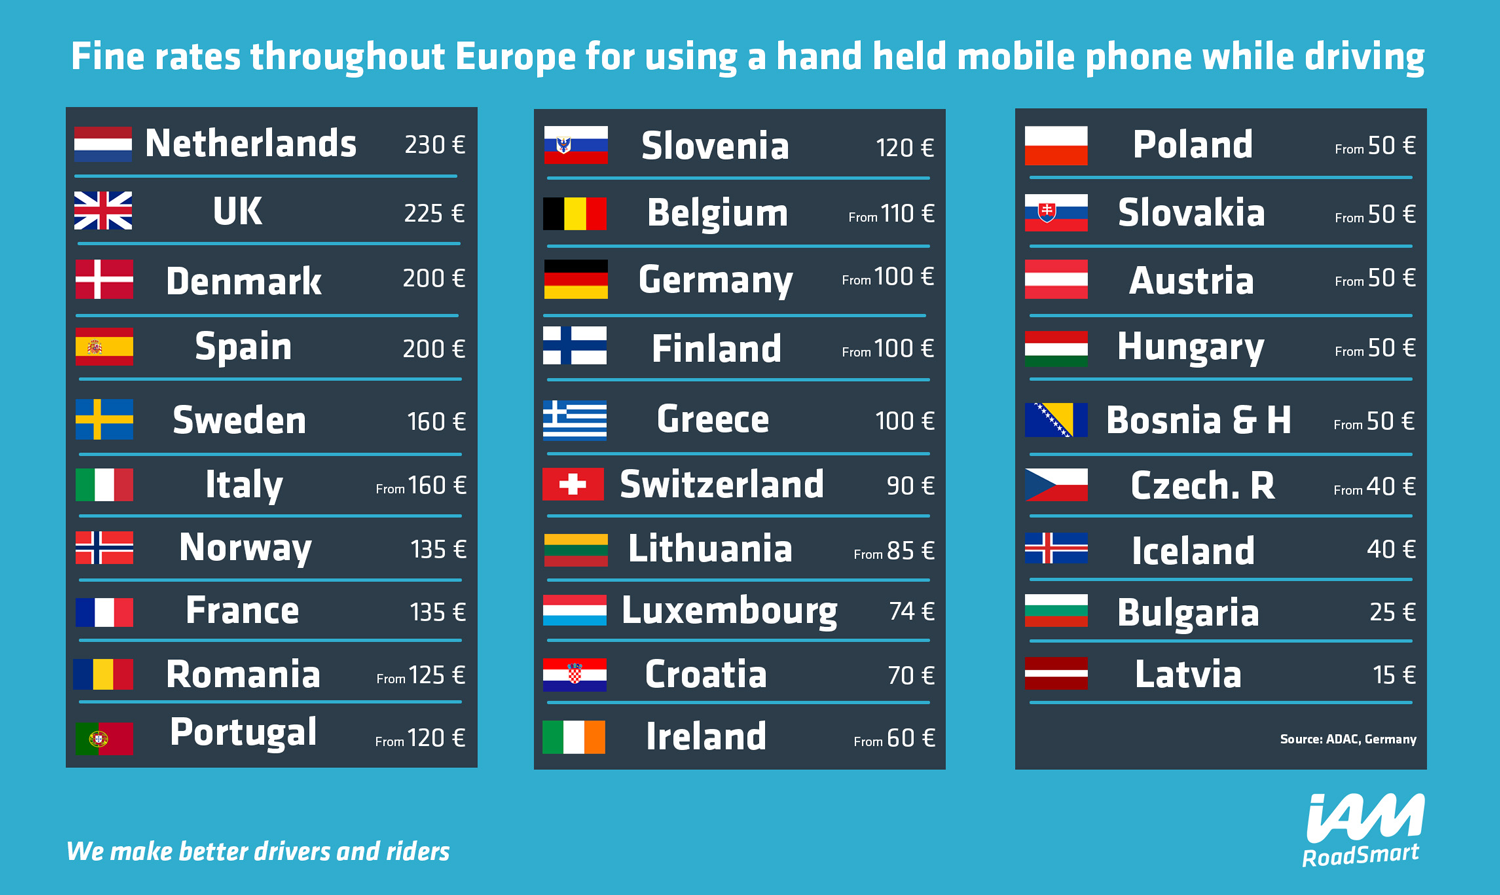 EU fines for mobile phone use while driving